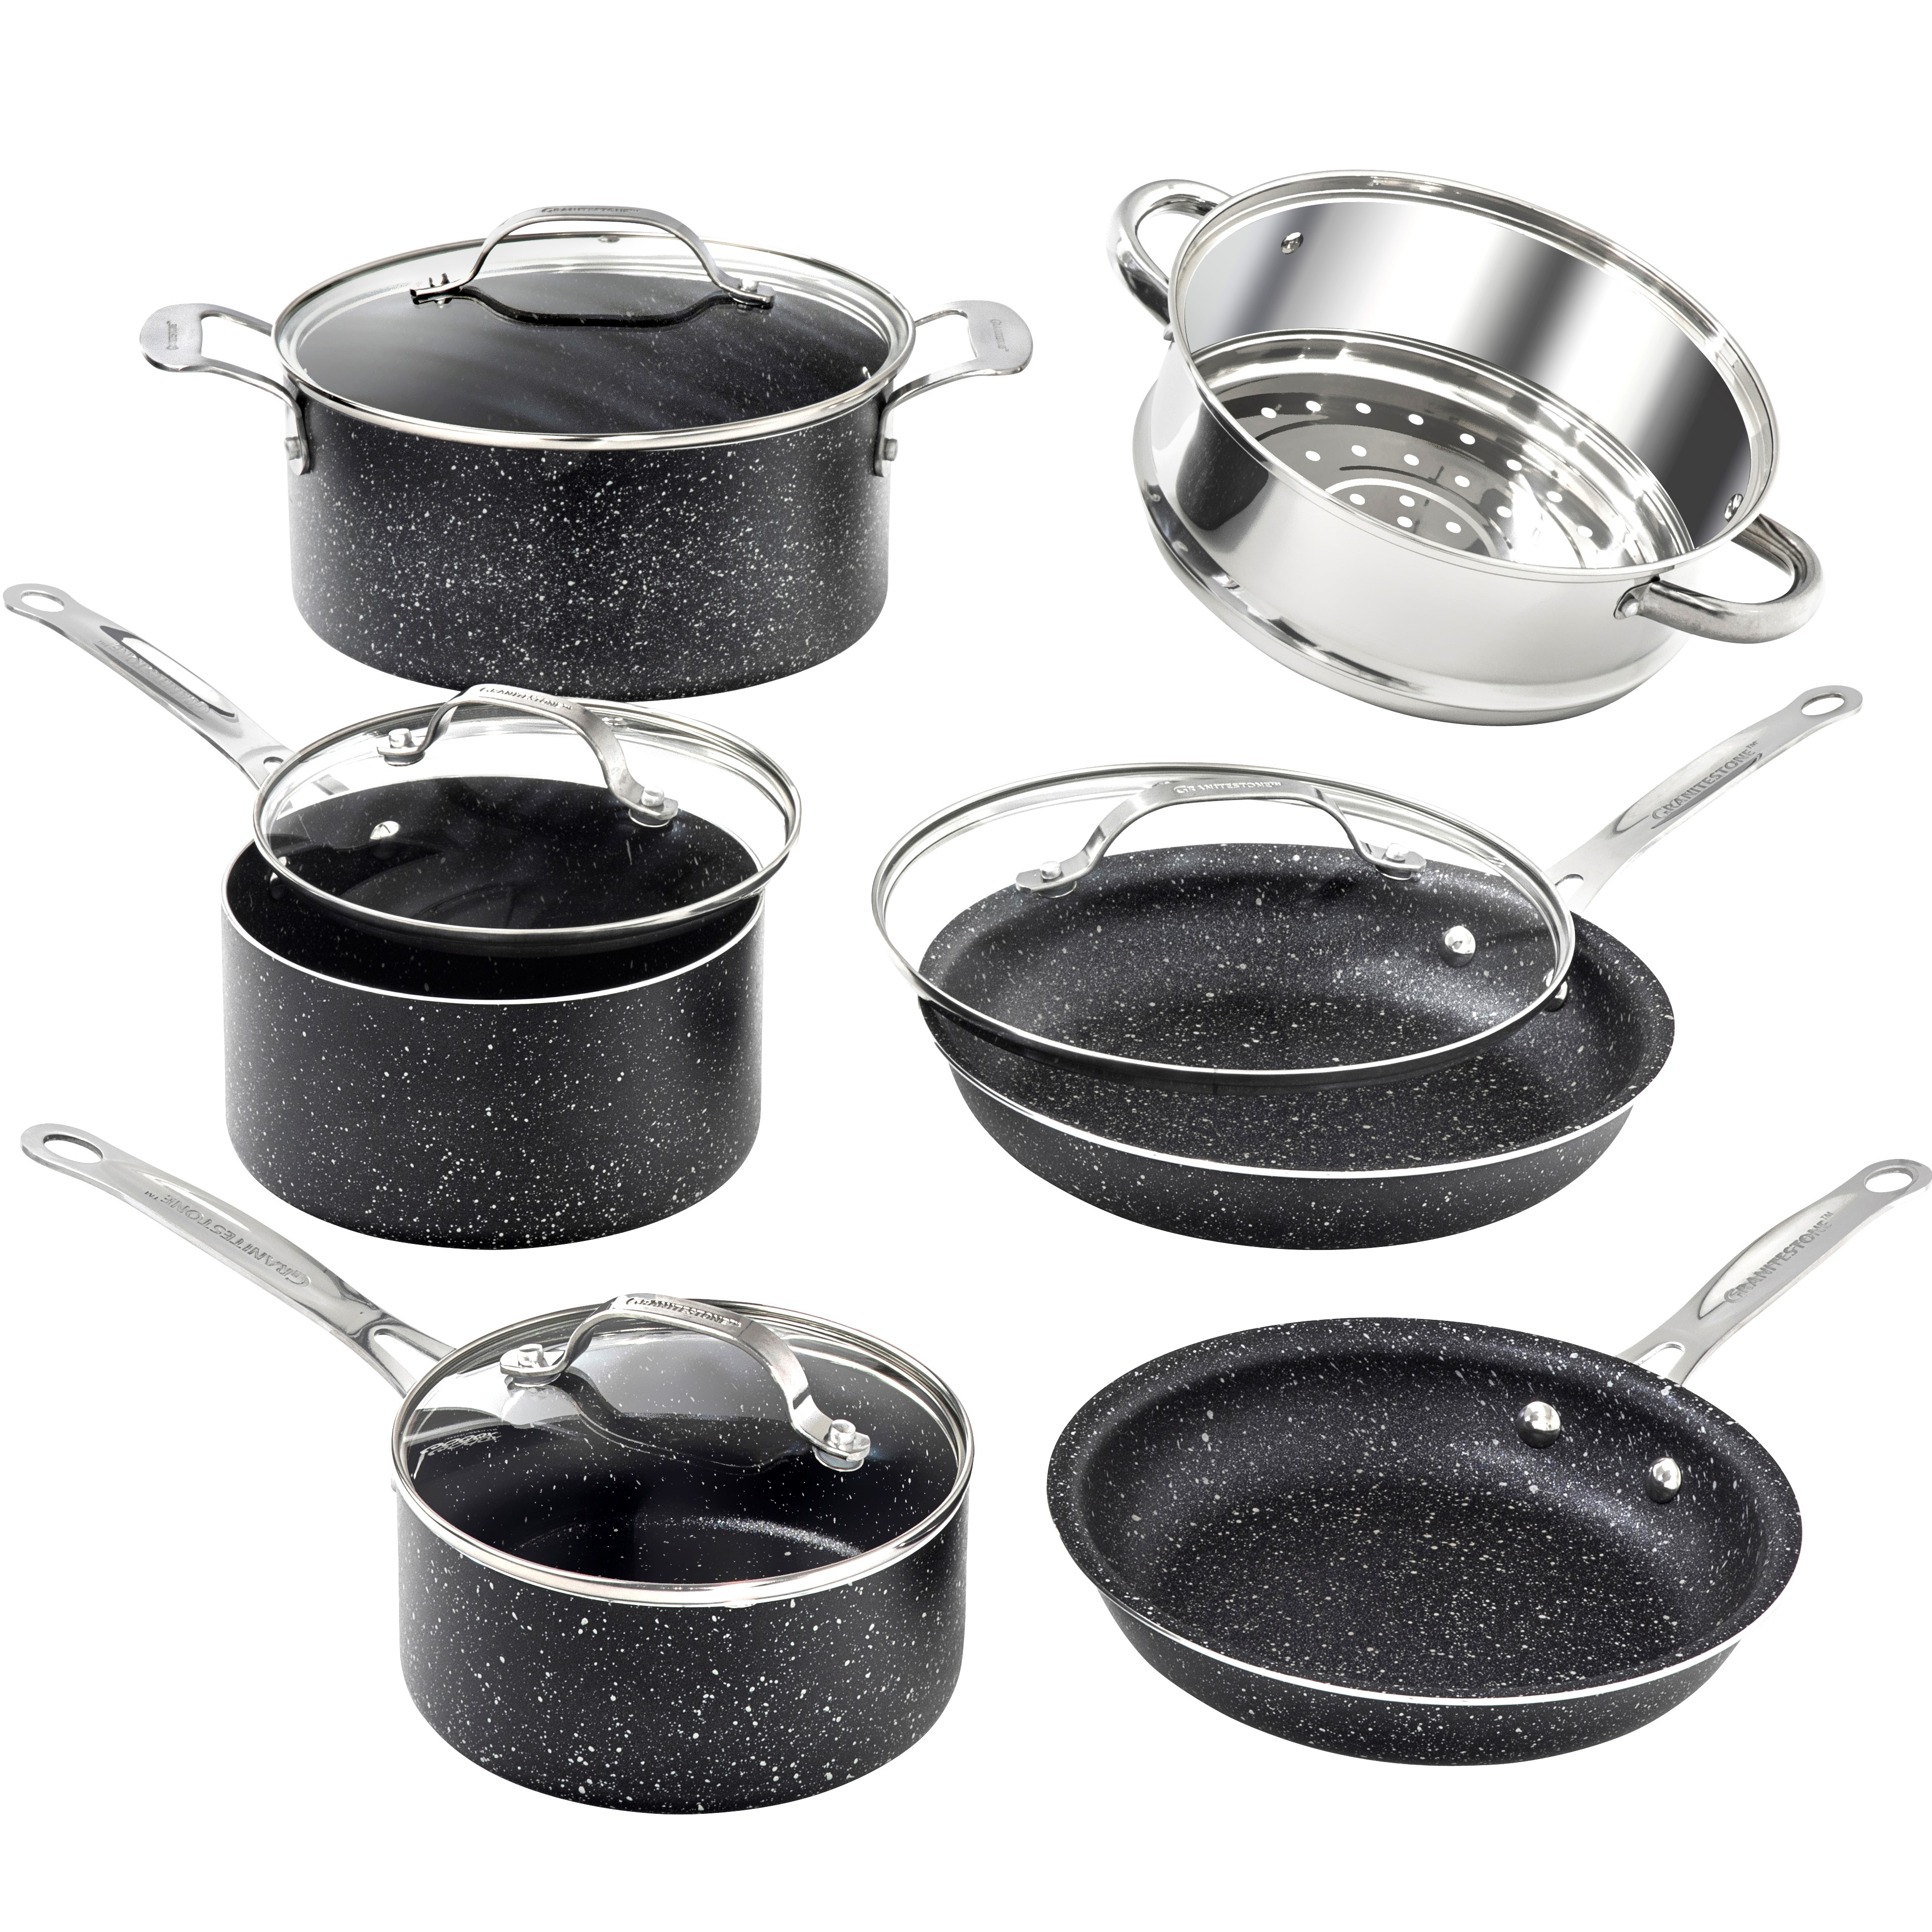 Granite Stone Pots and Pans Set, 10 Piece Nonstick Cookware Set, Includes Steamer, Scratch Resistant, Granite Coated, Dishwasher and Oven-Safe, PFOA-Free, Black - image 1 of 11